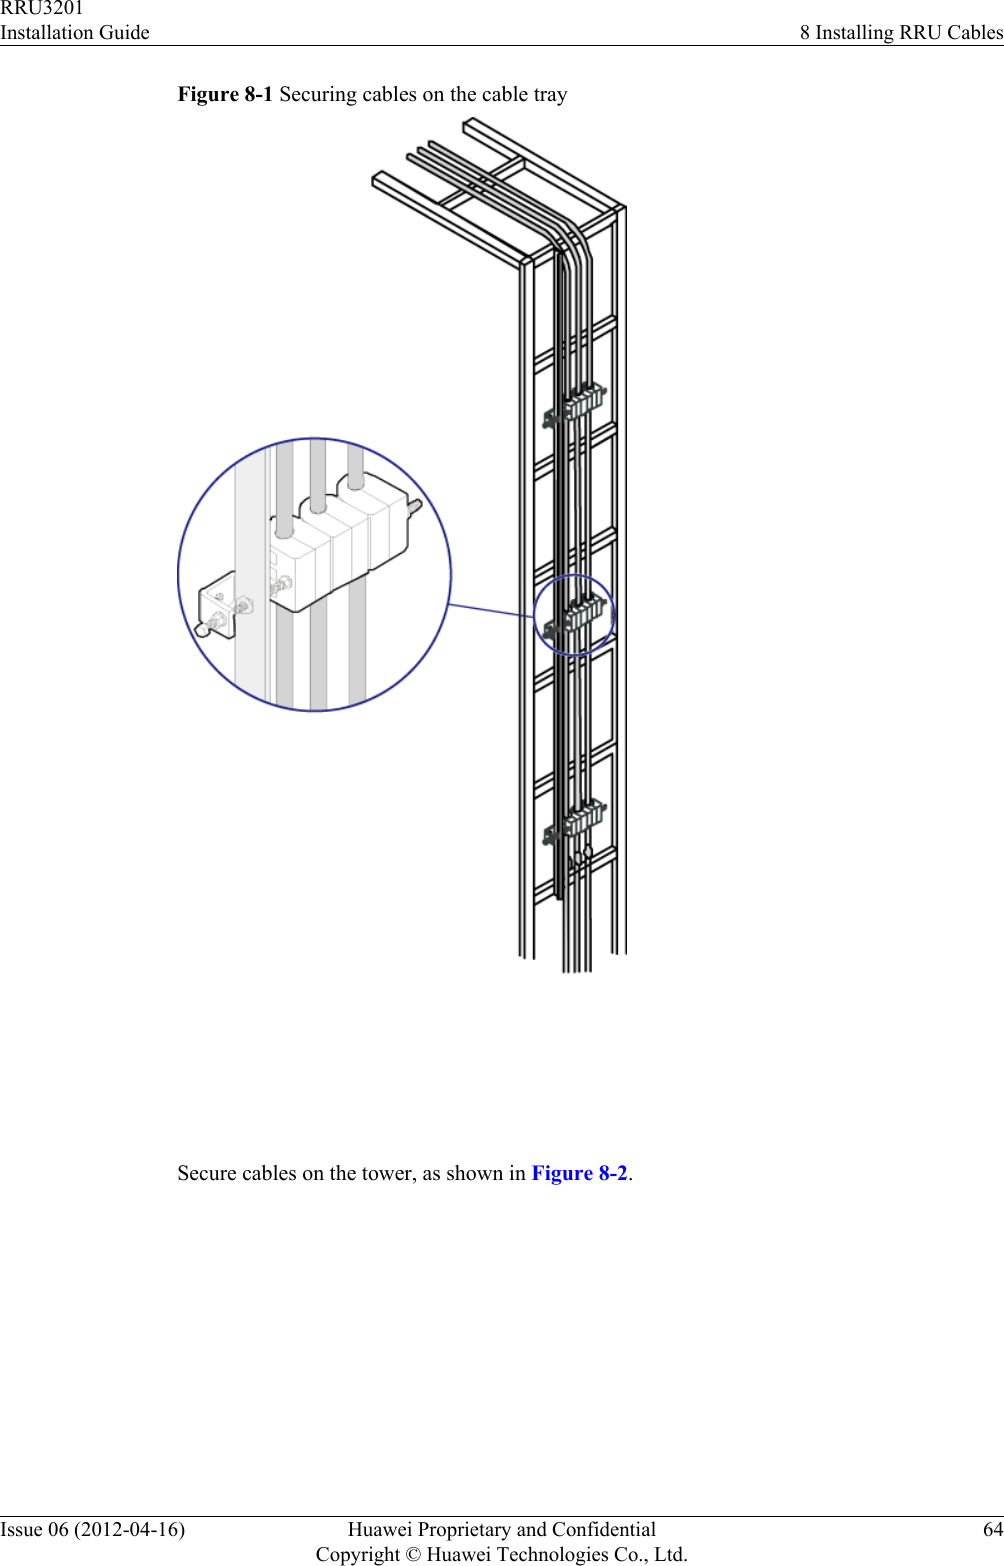 Figure 8-1 Securing cables on the cable tray Secure cables on the tower, as shown in Figure 8-2.RRU3201Installation Guide 8 Installing RRU CablesIssue 06 (2012-04-16) Huawei Proprietary and ConfidentialCopyright © Huawei Technologies Co., Ltd.64